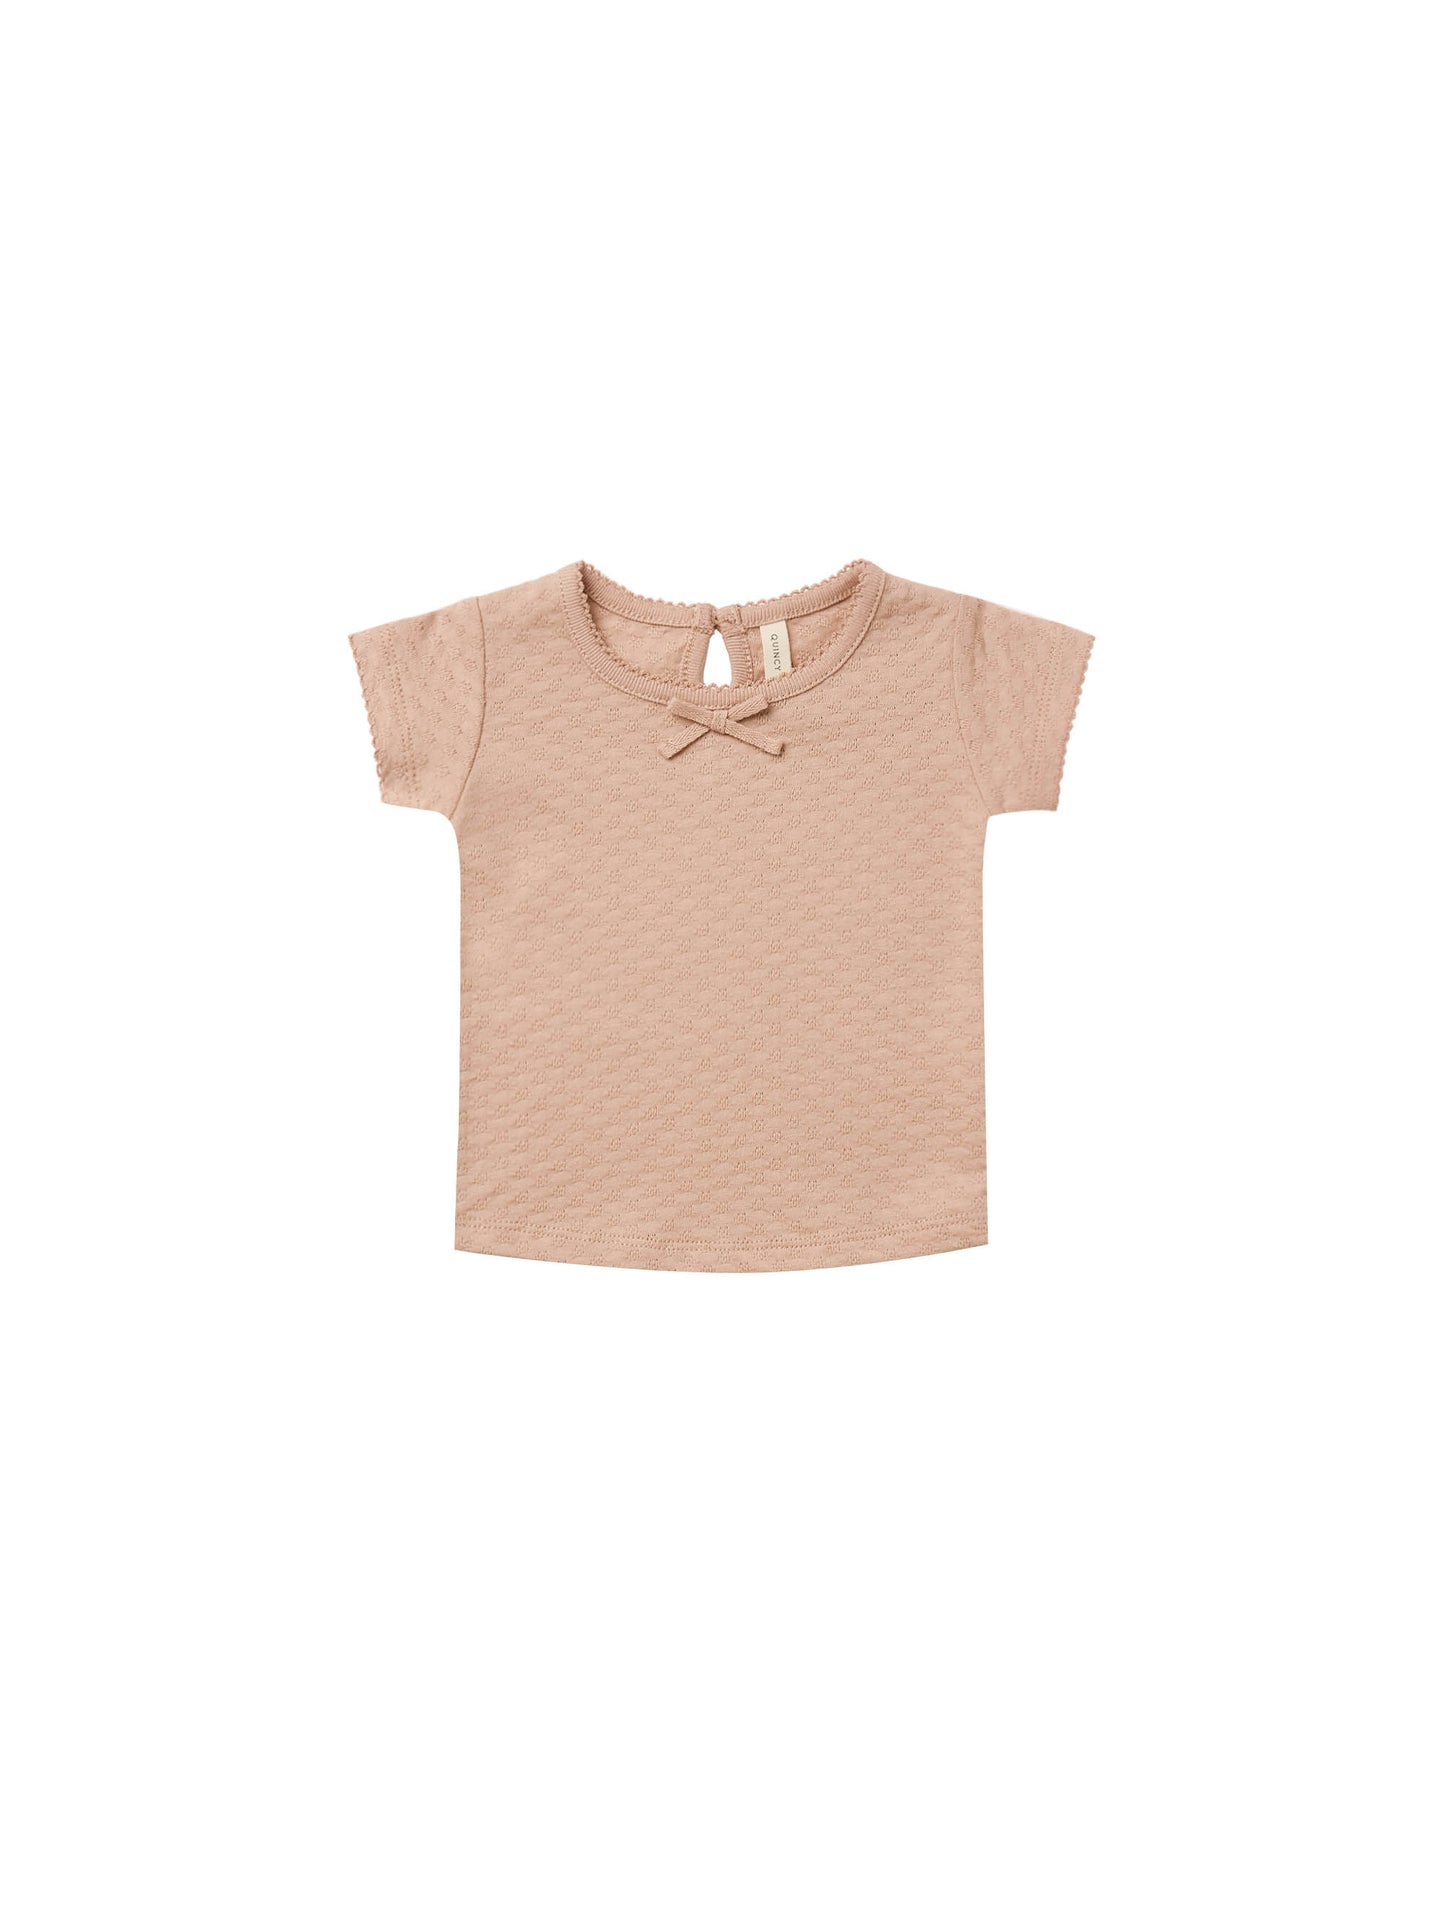 SALE - Quincy Mae Pointelle Tee - Multiple Colors Available